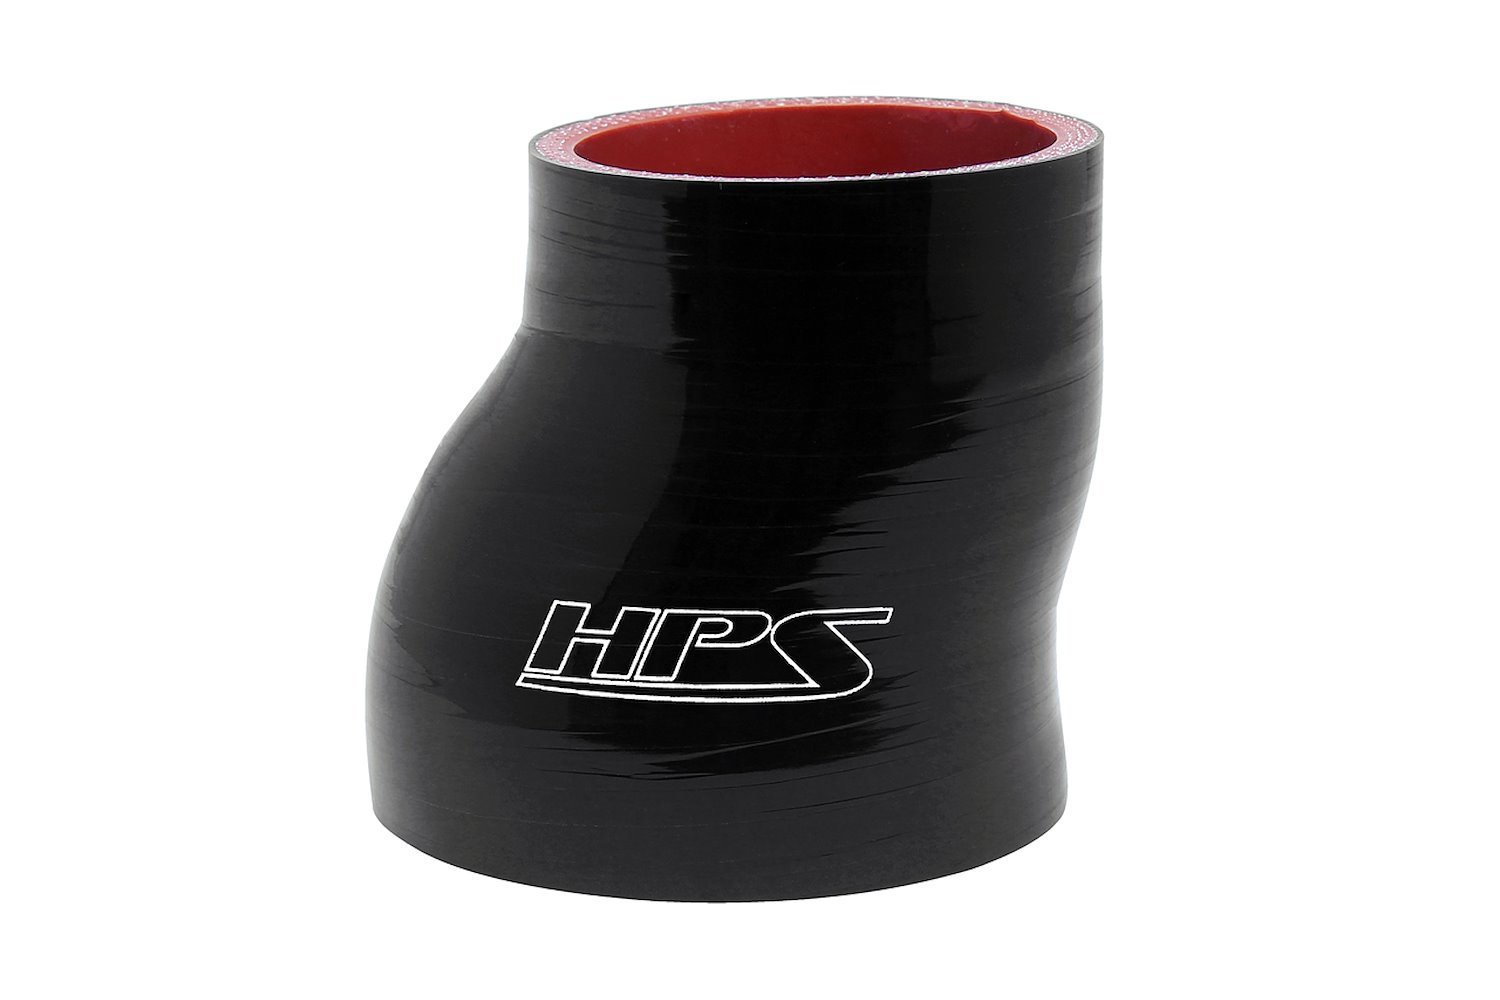 HTSOR-200-225-BLK Silicone Offset Reducer Hose, High-Temp Reinforced, 2 in. - 2-1/4 in. ID, 3 in. Long, Black